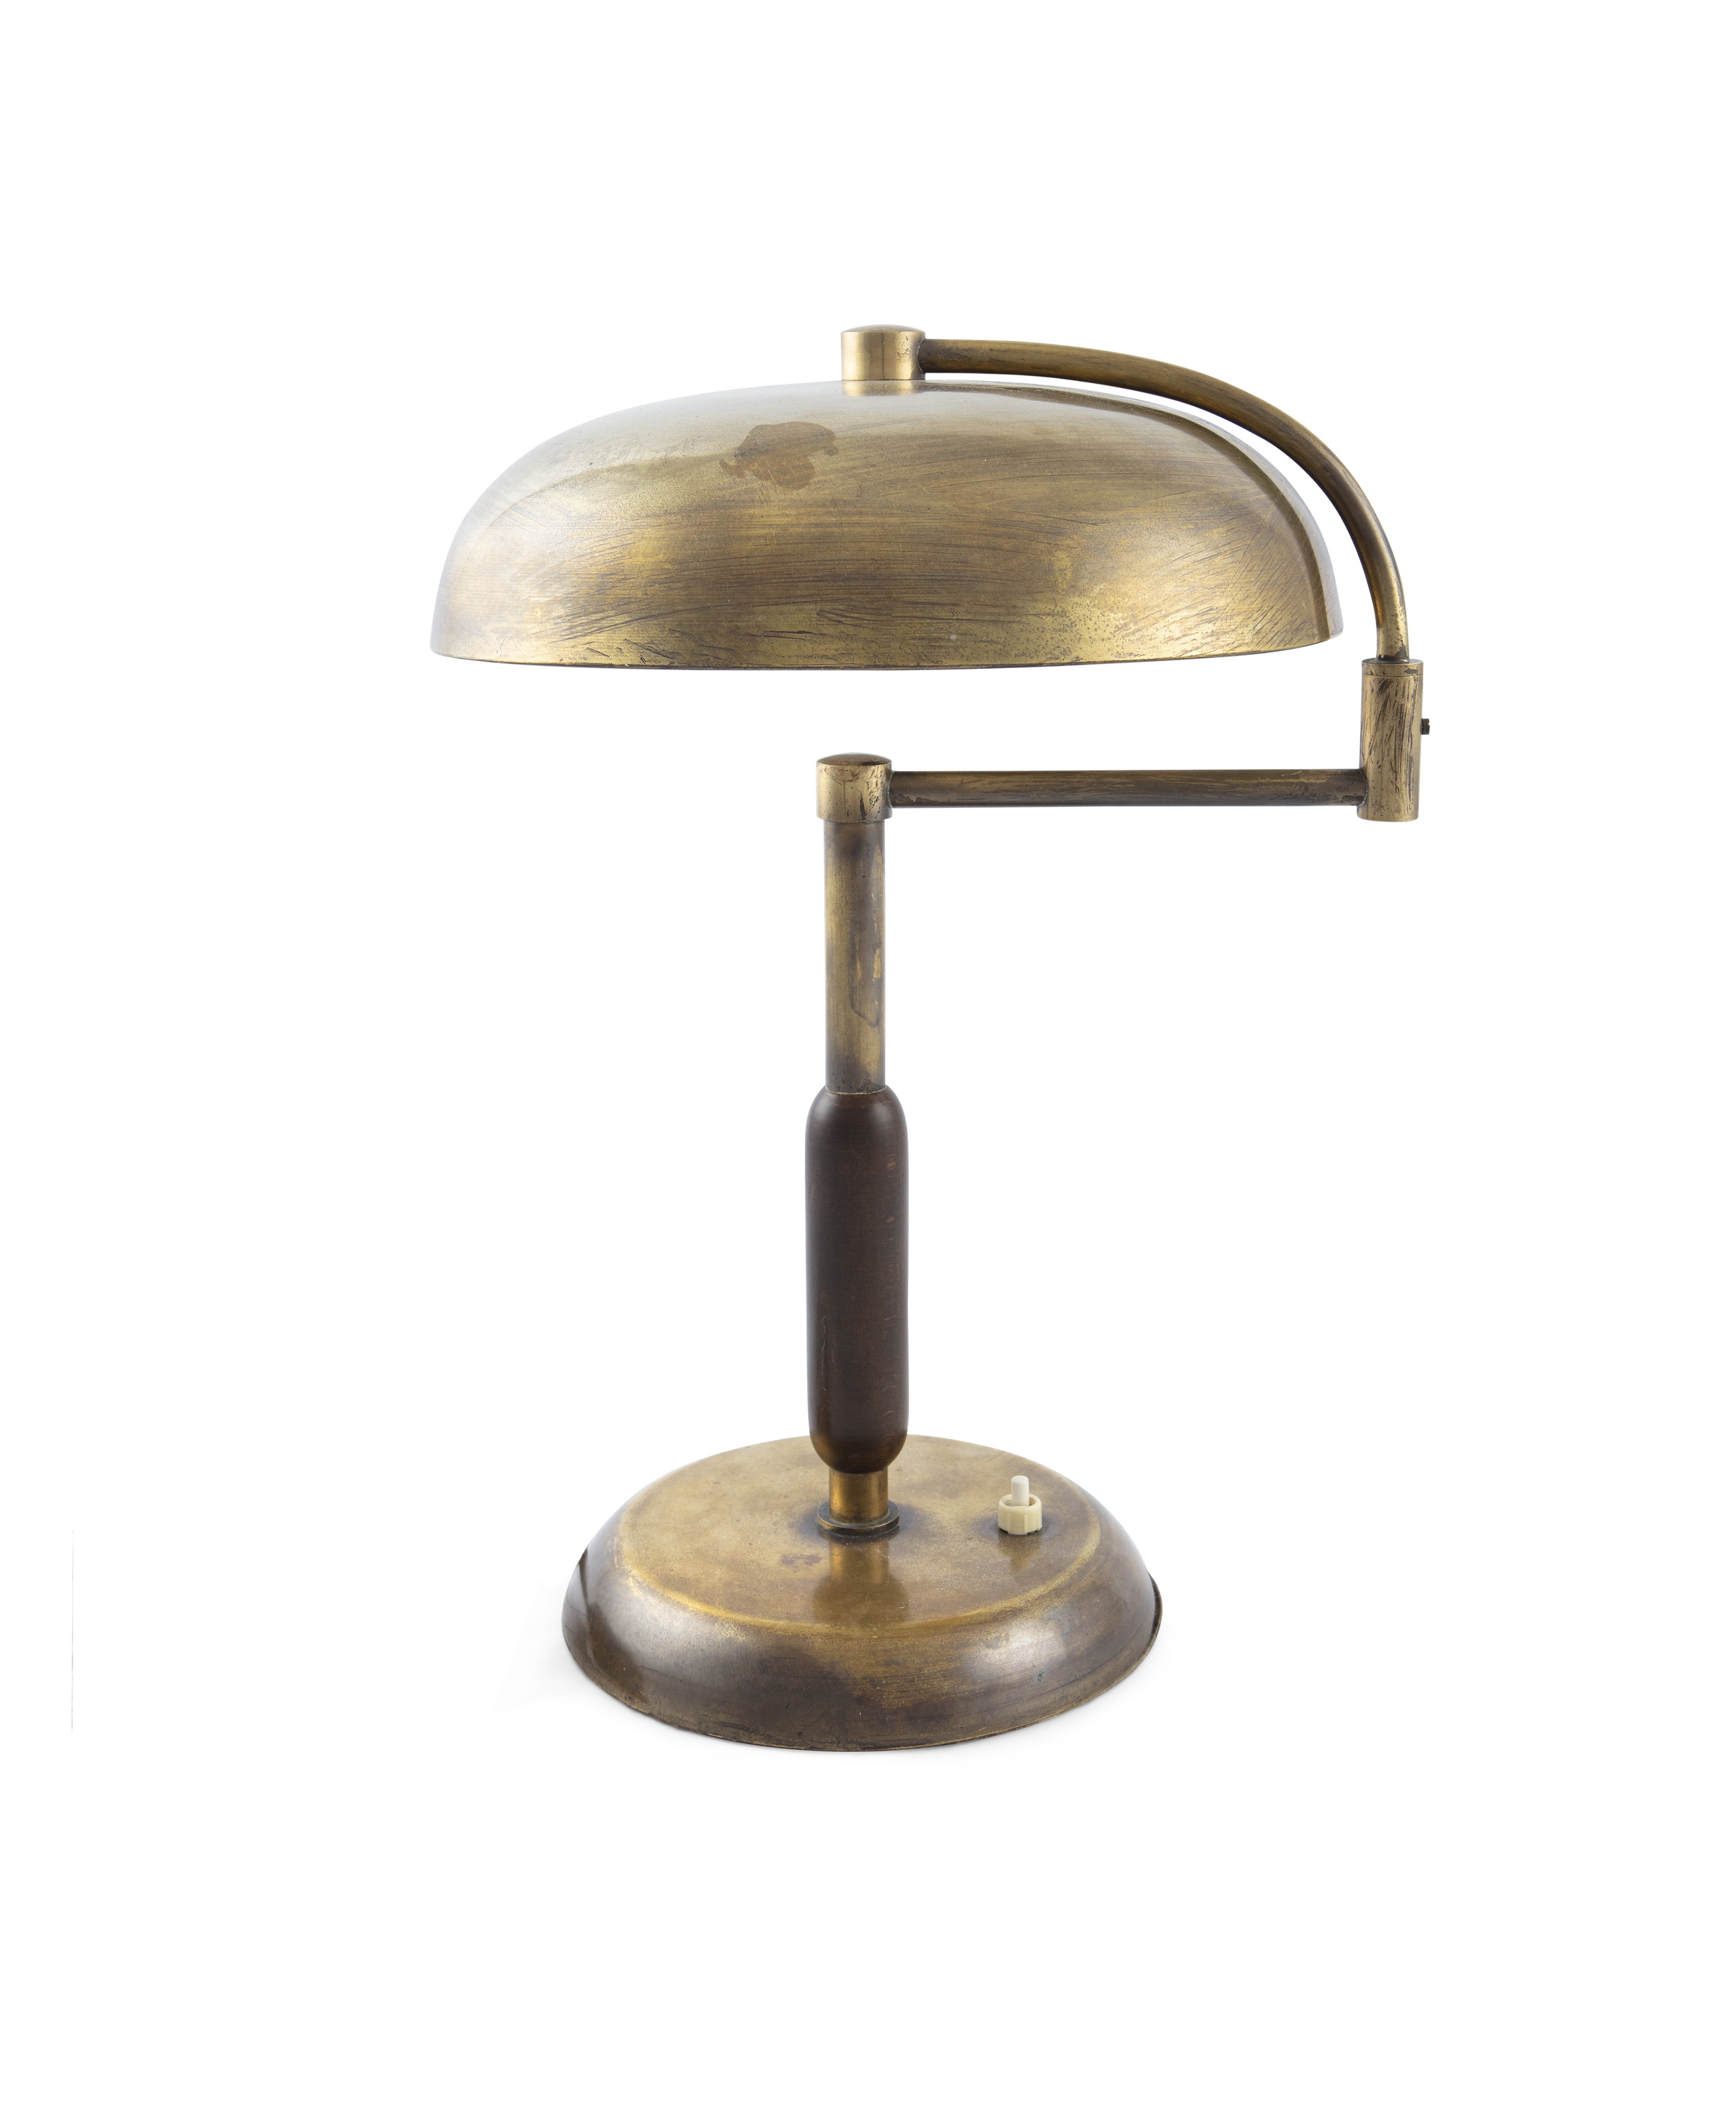 MAISON DESNY A Maison Desny table lamp, in brass and lacquered wood, France c.1930. 39cm high